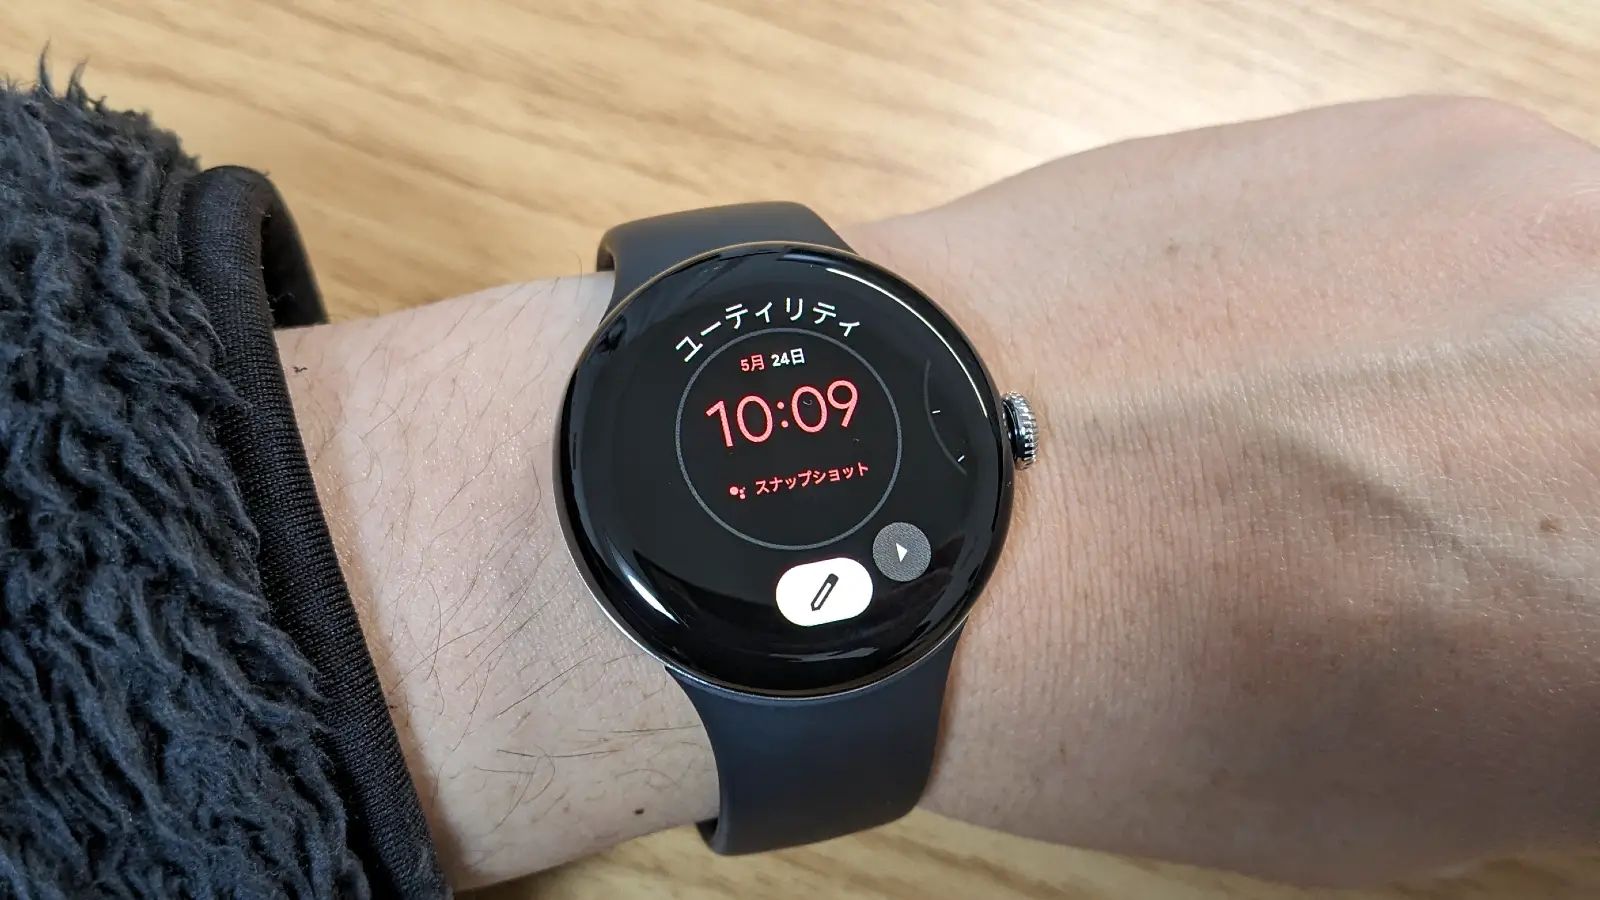 Dynamic Material Color may be coming to Wear OS soon